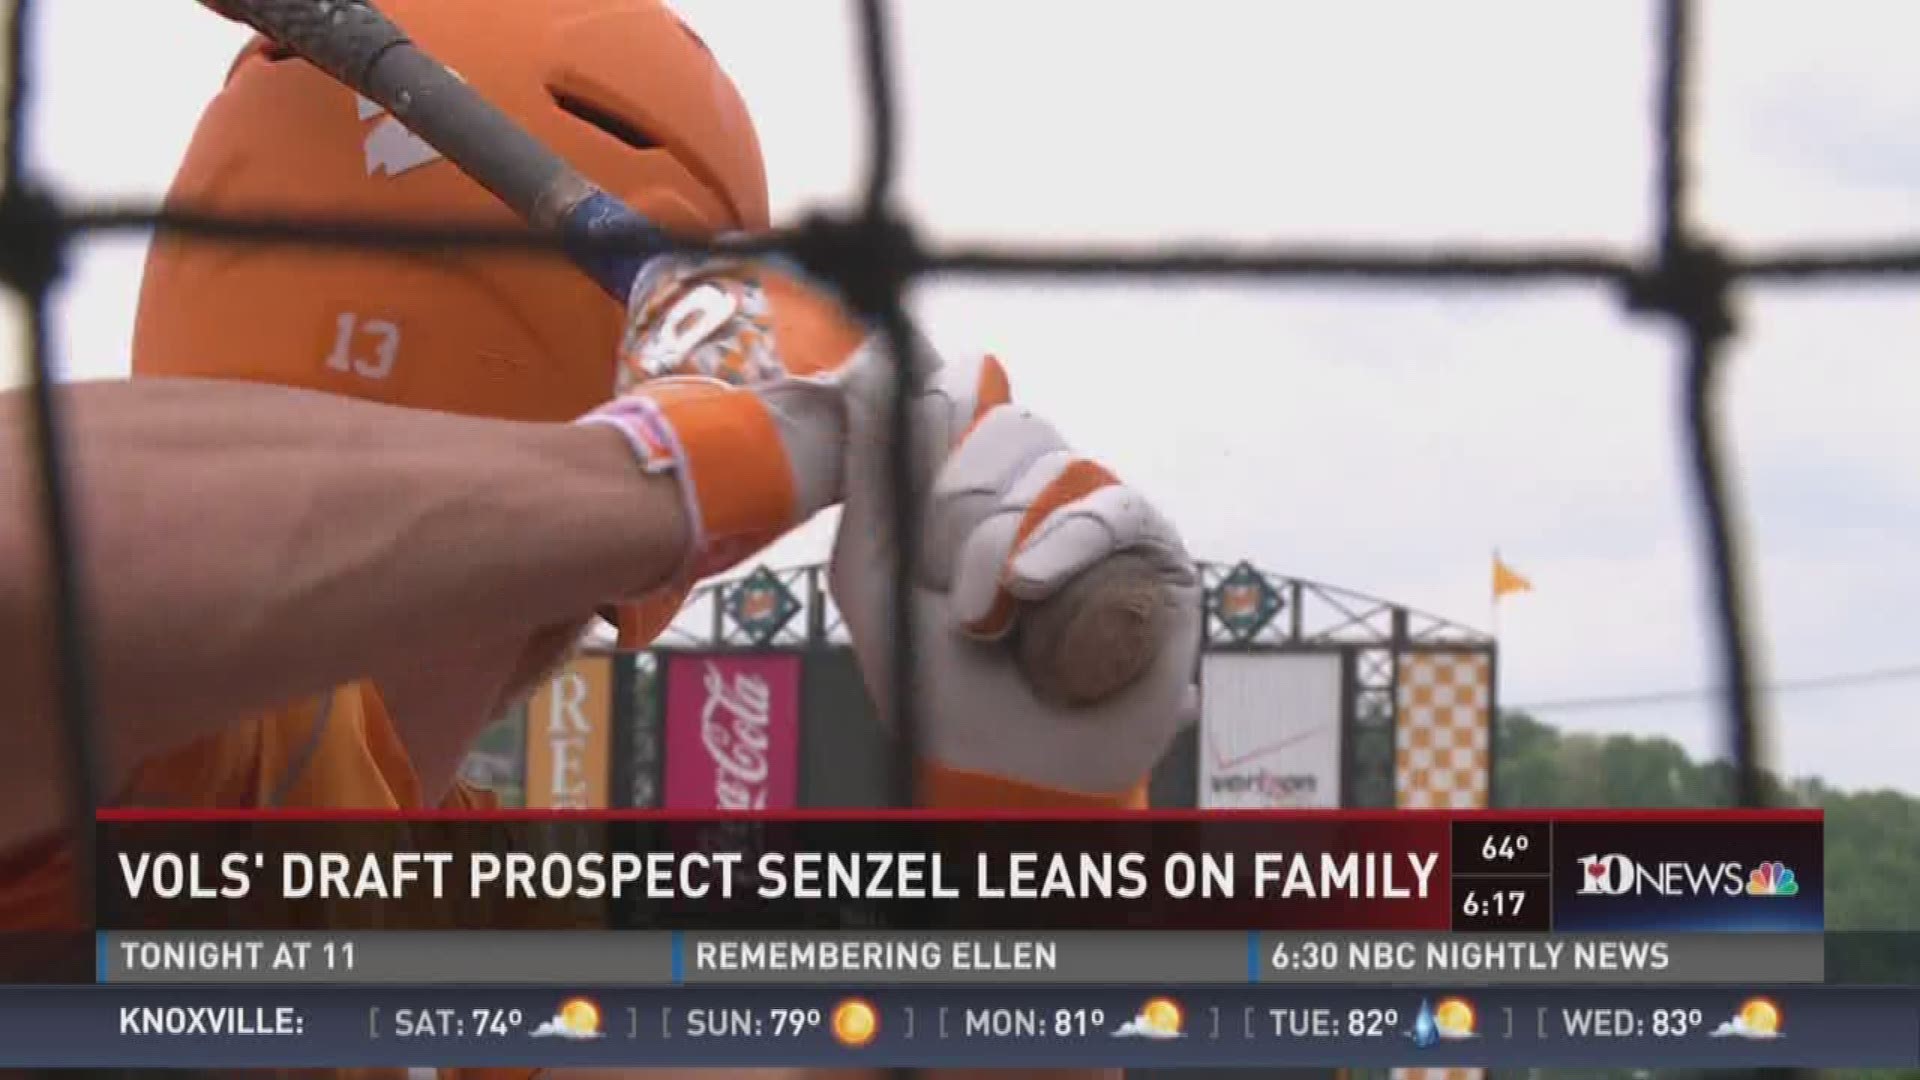 Tennessee infielder Nick Senzel is expected to be a top 10 pick in the MLB Draft this summer. It wasn't an easy road for the Farragut High graduate to get to this point.